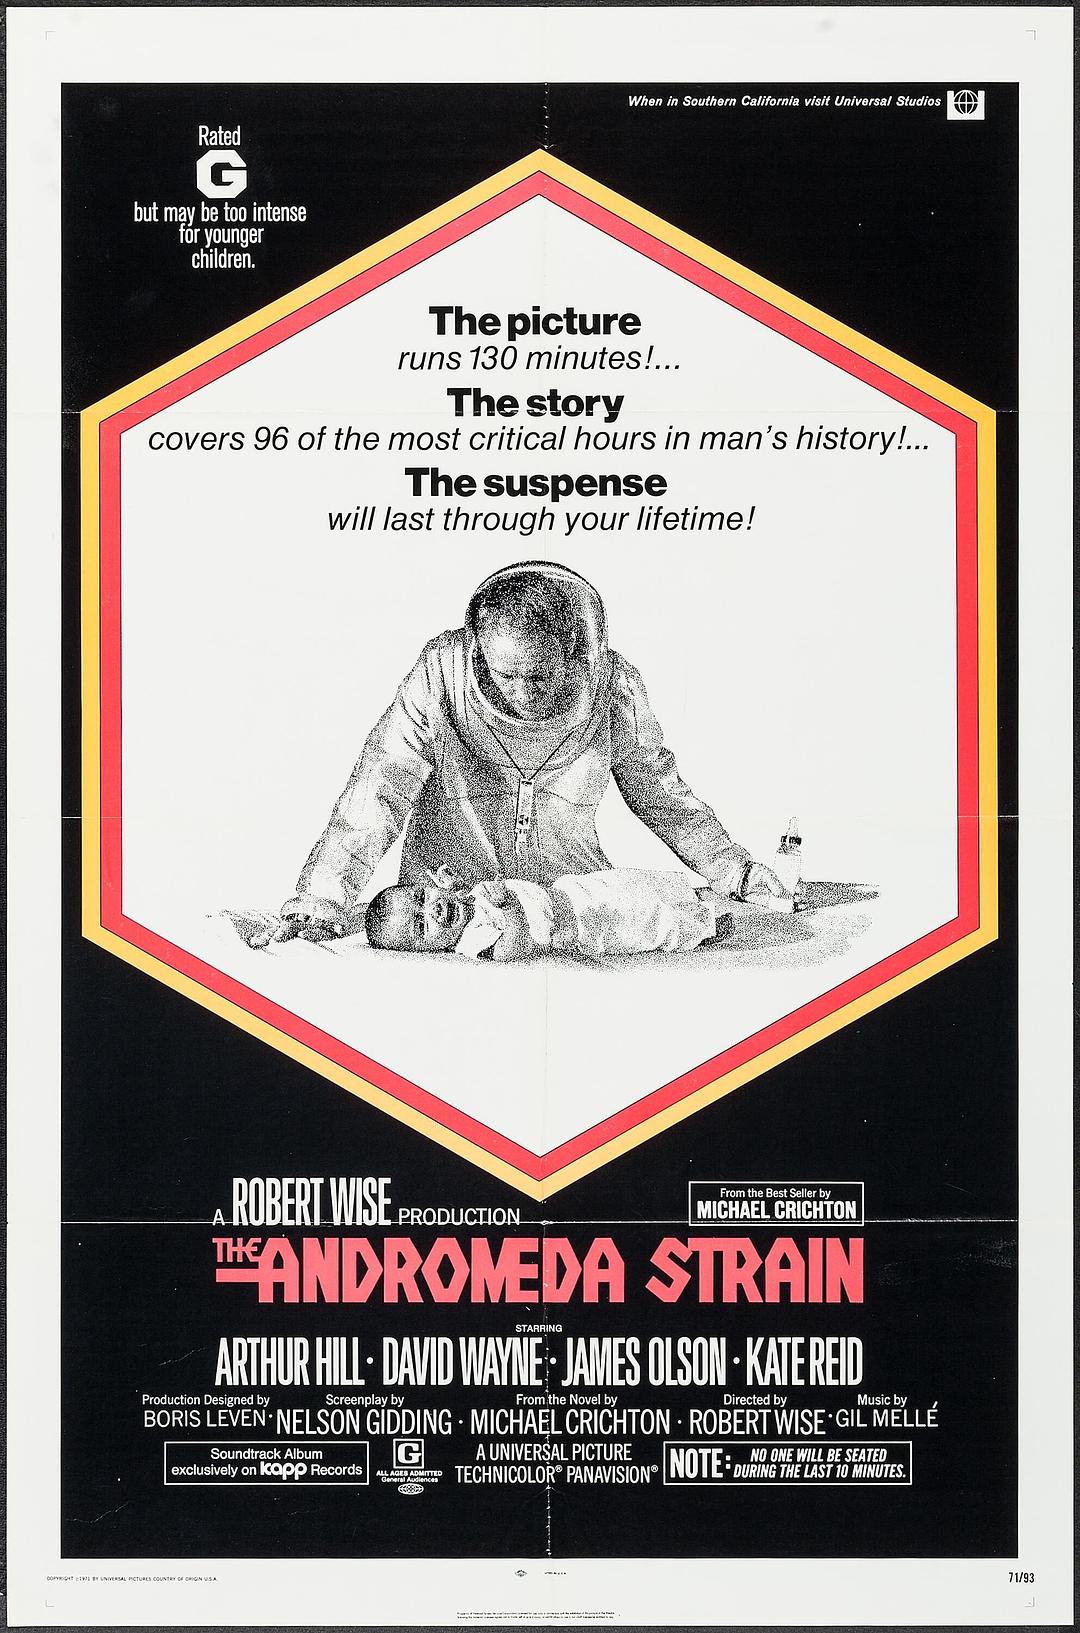 ˼ƽ/Ů The.Andromeda.Strain.1971.REMASTERED.720p.BluRay.X264-AMIABLE 7.66GB-1.png